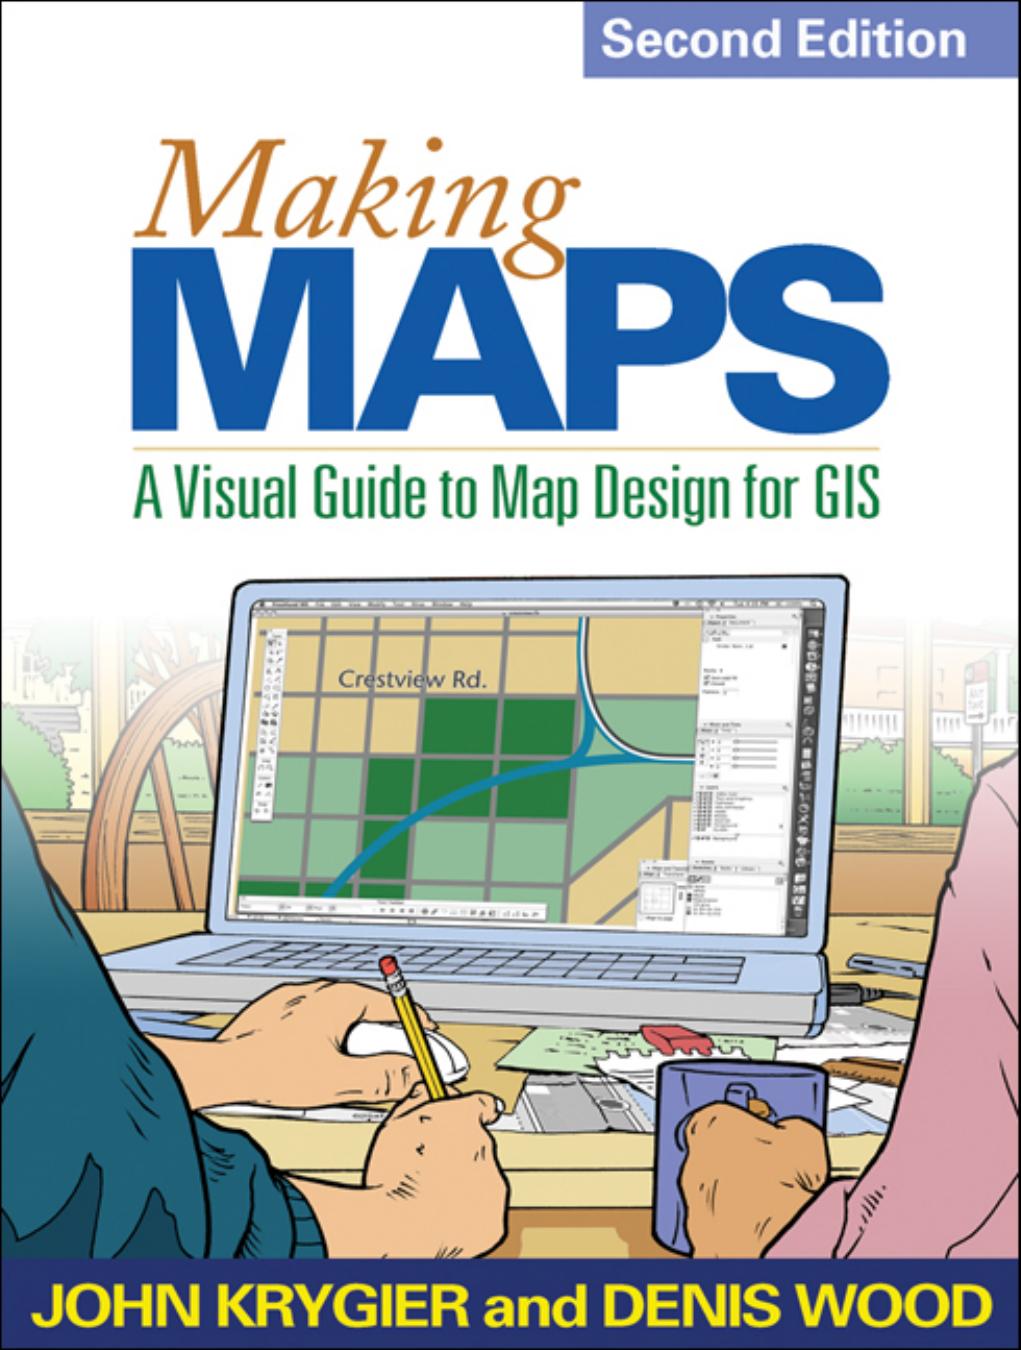 Making Maps - A Visual Guide to Map Design for GIS (2nd Ed)